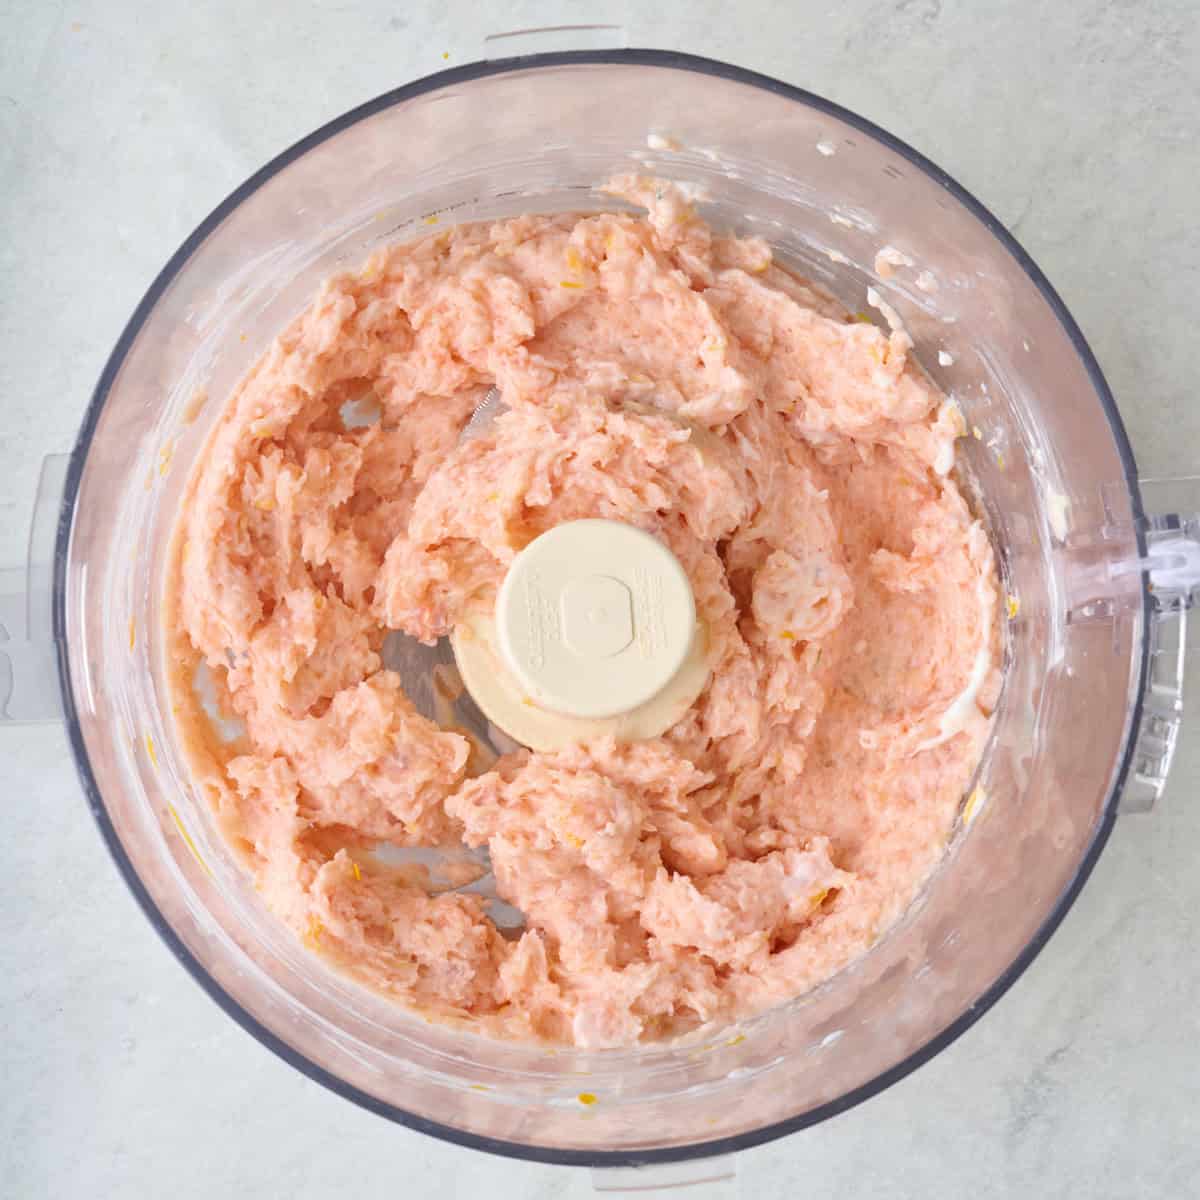 A blended salmon, yogurt, and mustard mixture in the bowl of a food procesor.